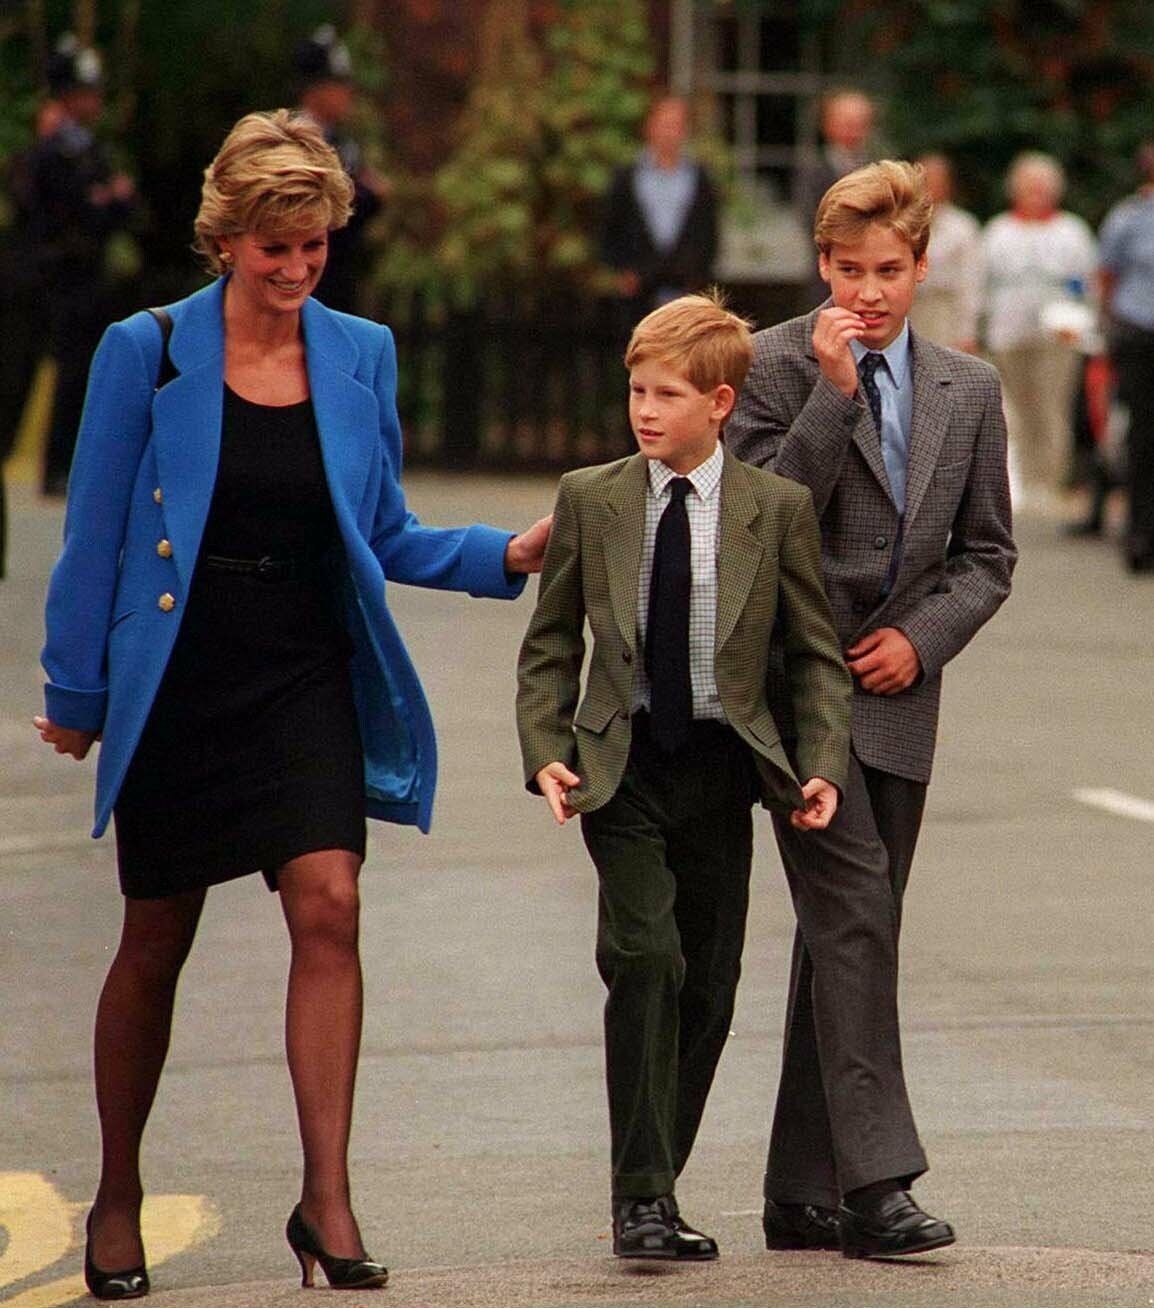 Prince William arrives with Diana, Princess of Wales and Prince Harry for his first day at Eton College on September 6, 1995 in Windsor, England.| Source: Getty Images